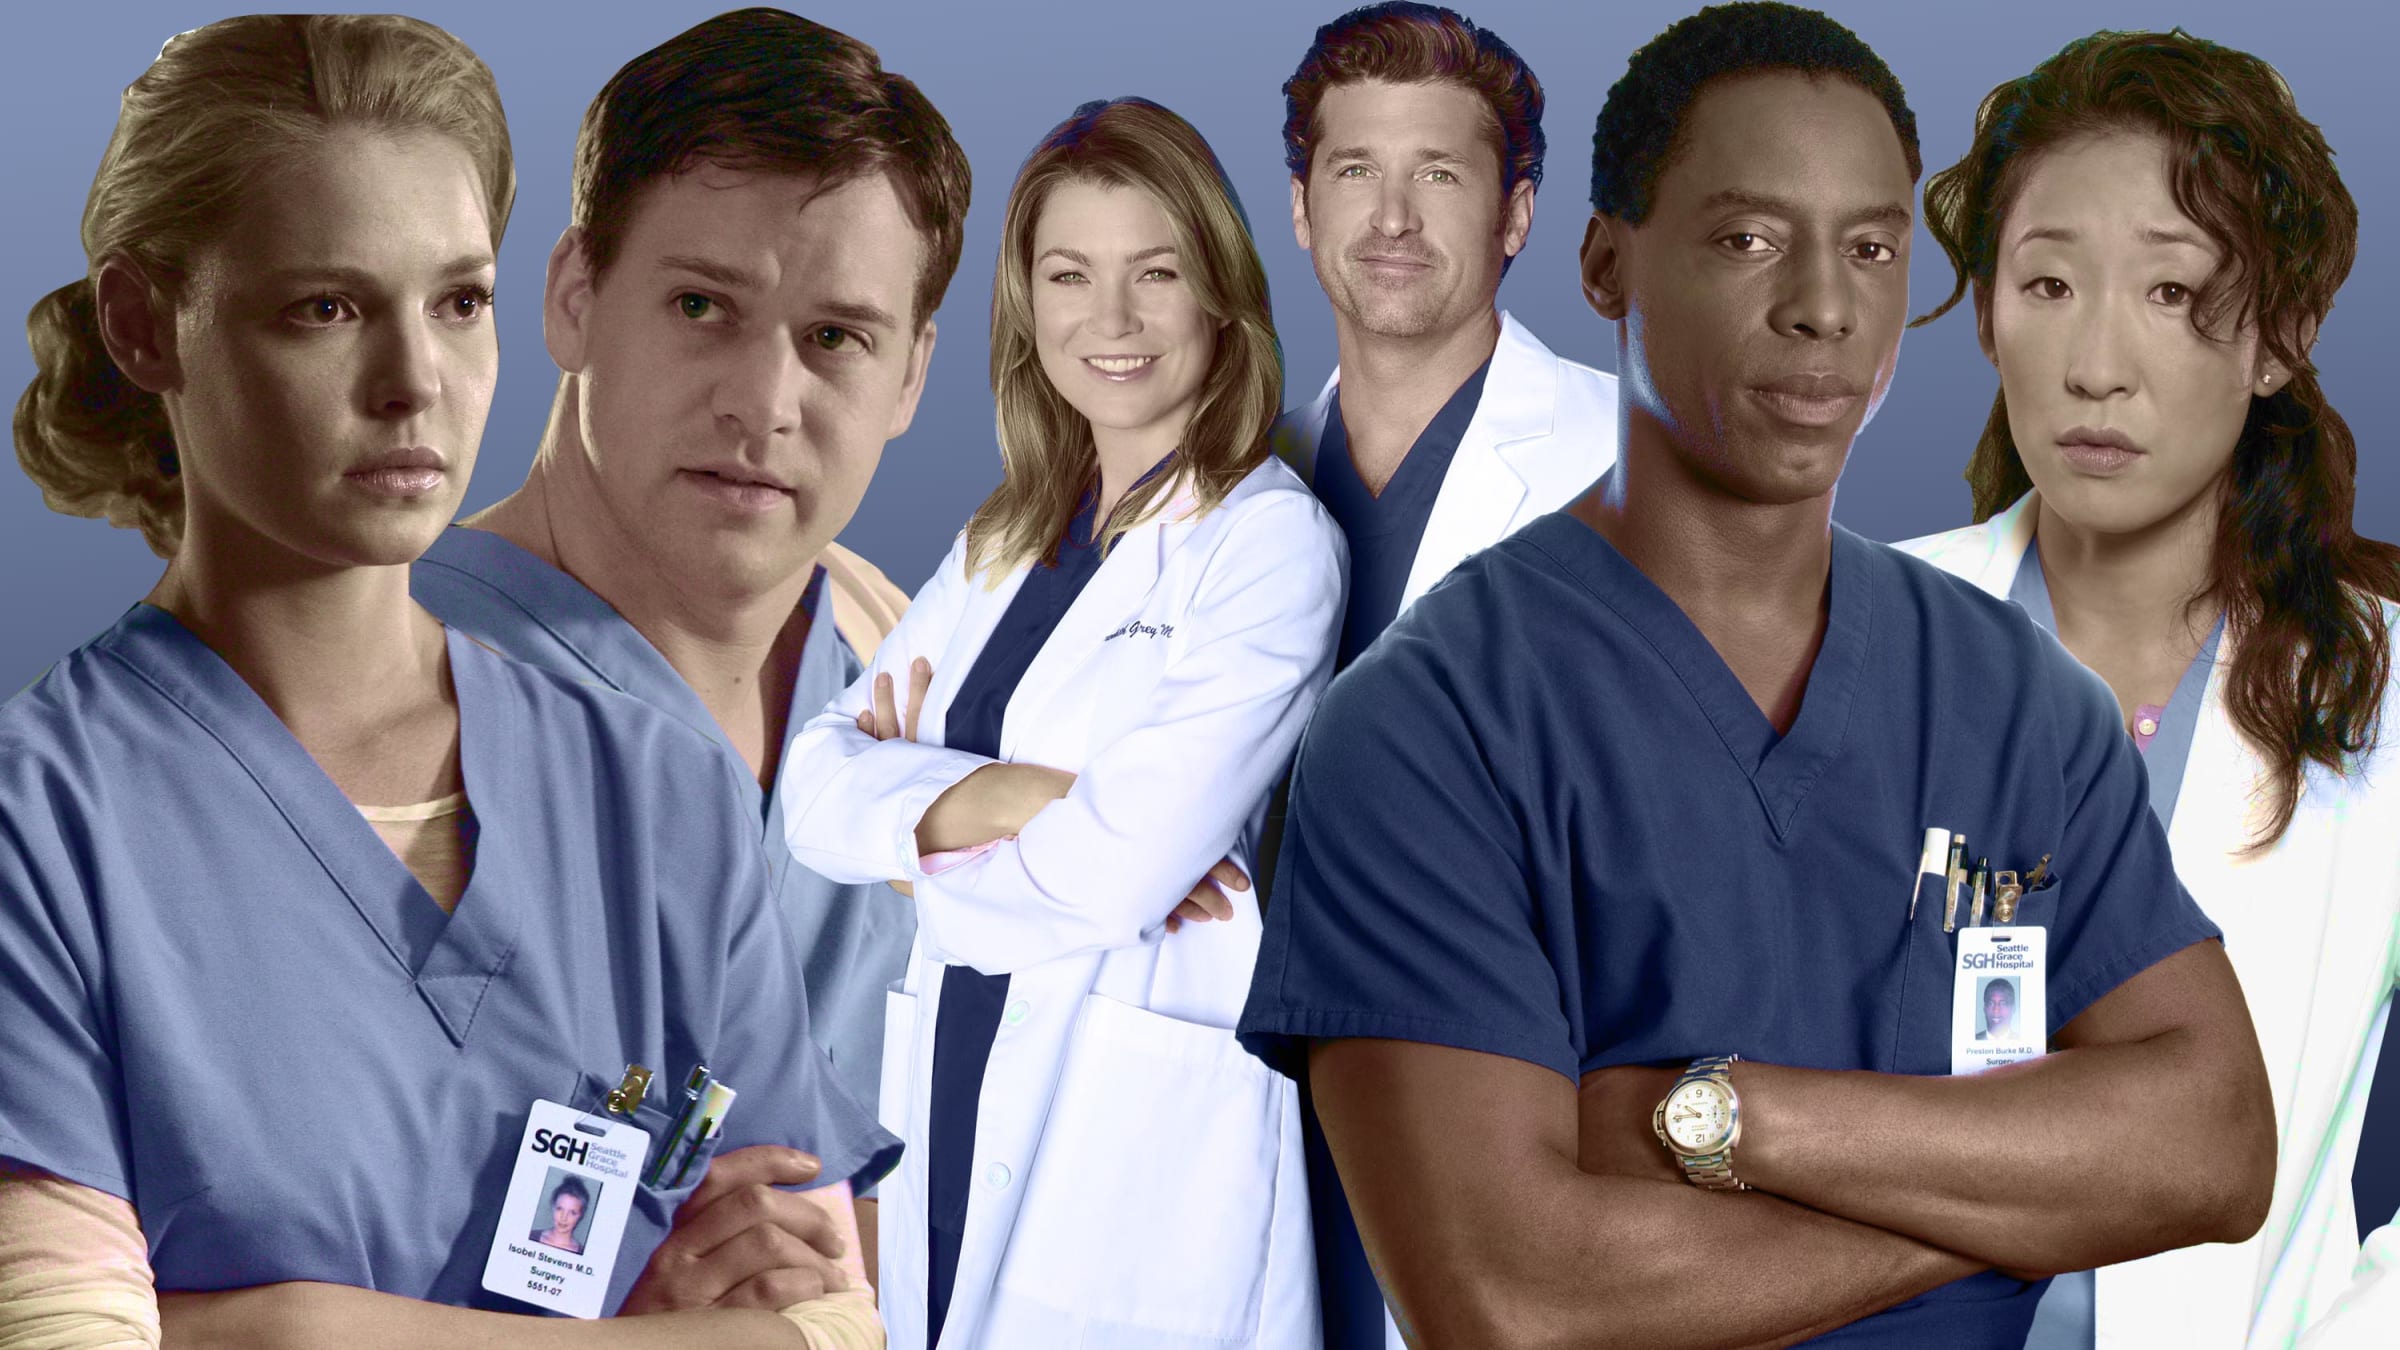 Inside ‘Grey’s Anatomy’s’ Many BehindtheScenes Scandals, From Diva